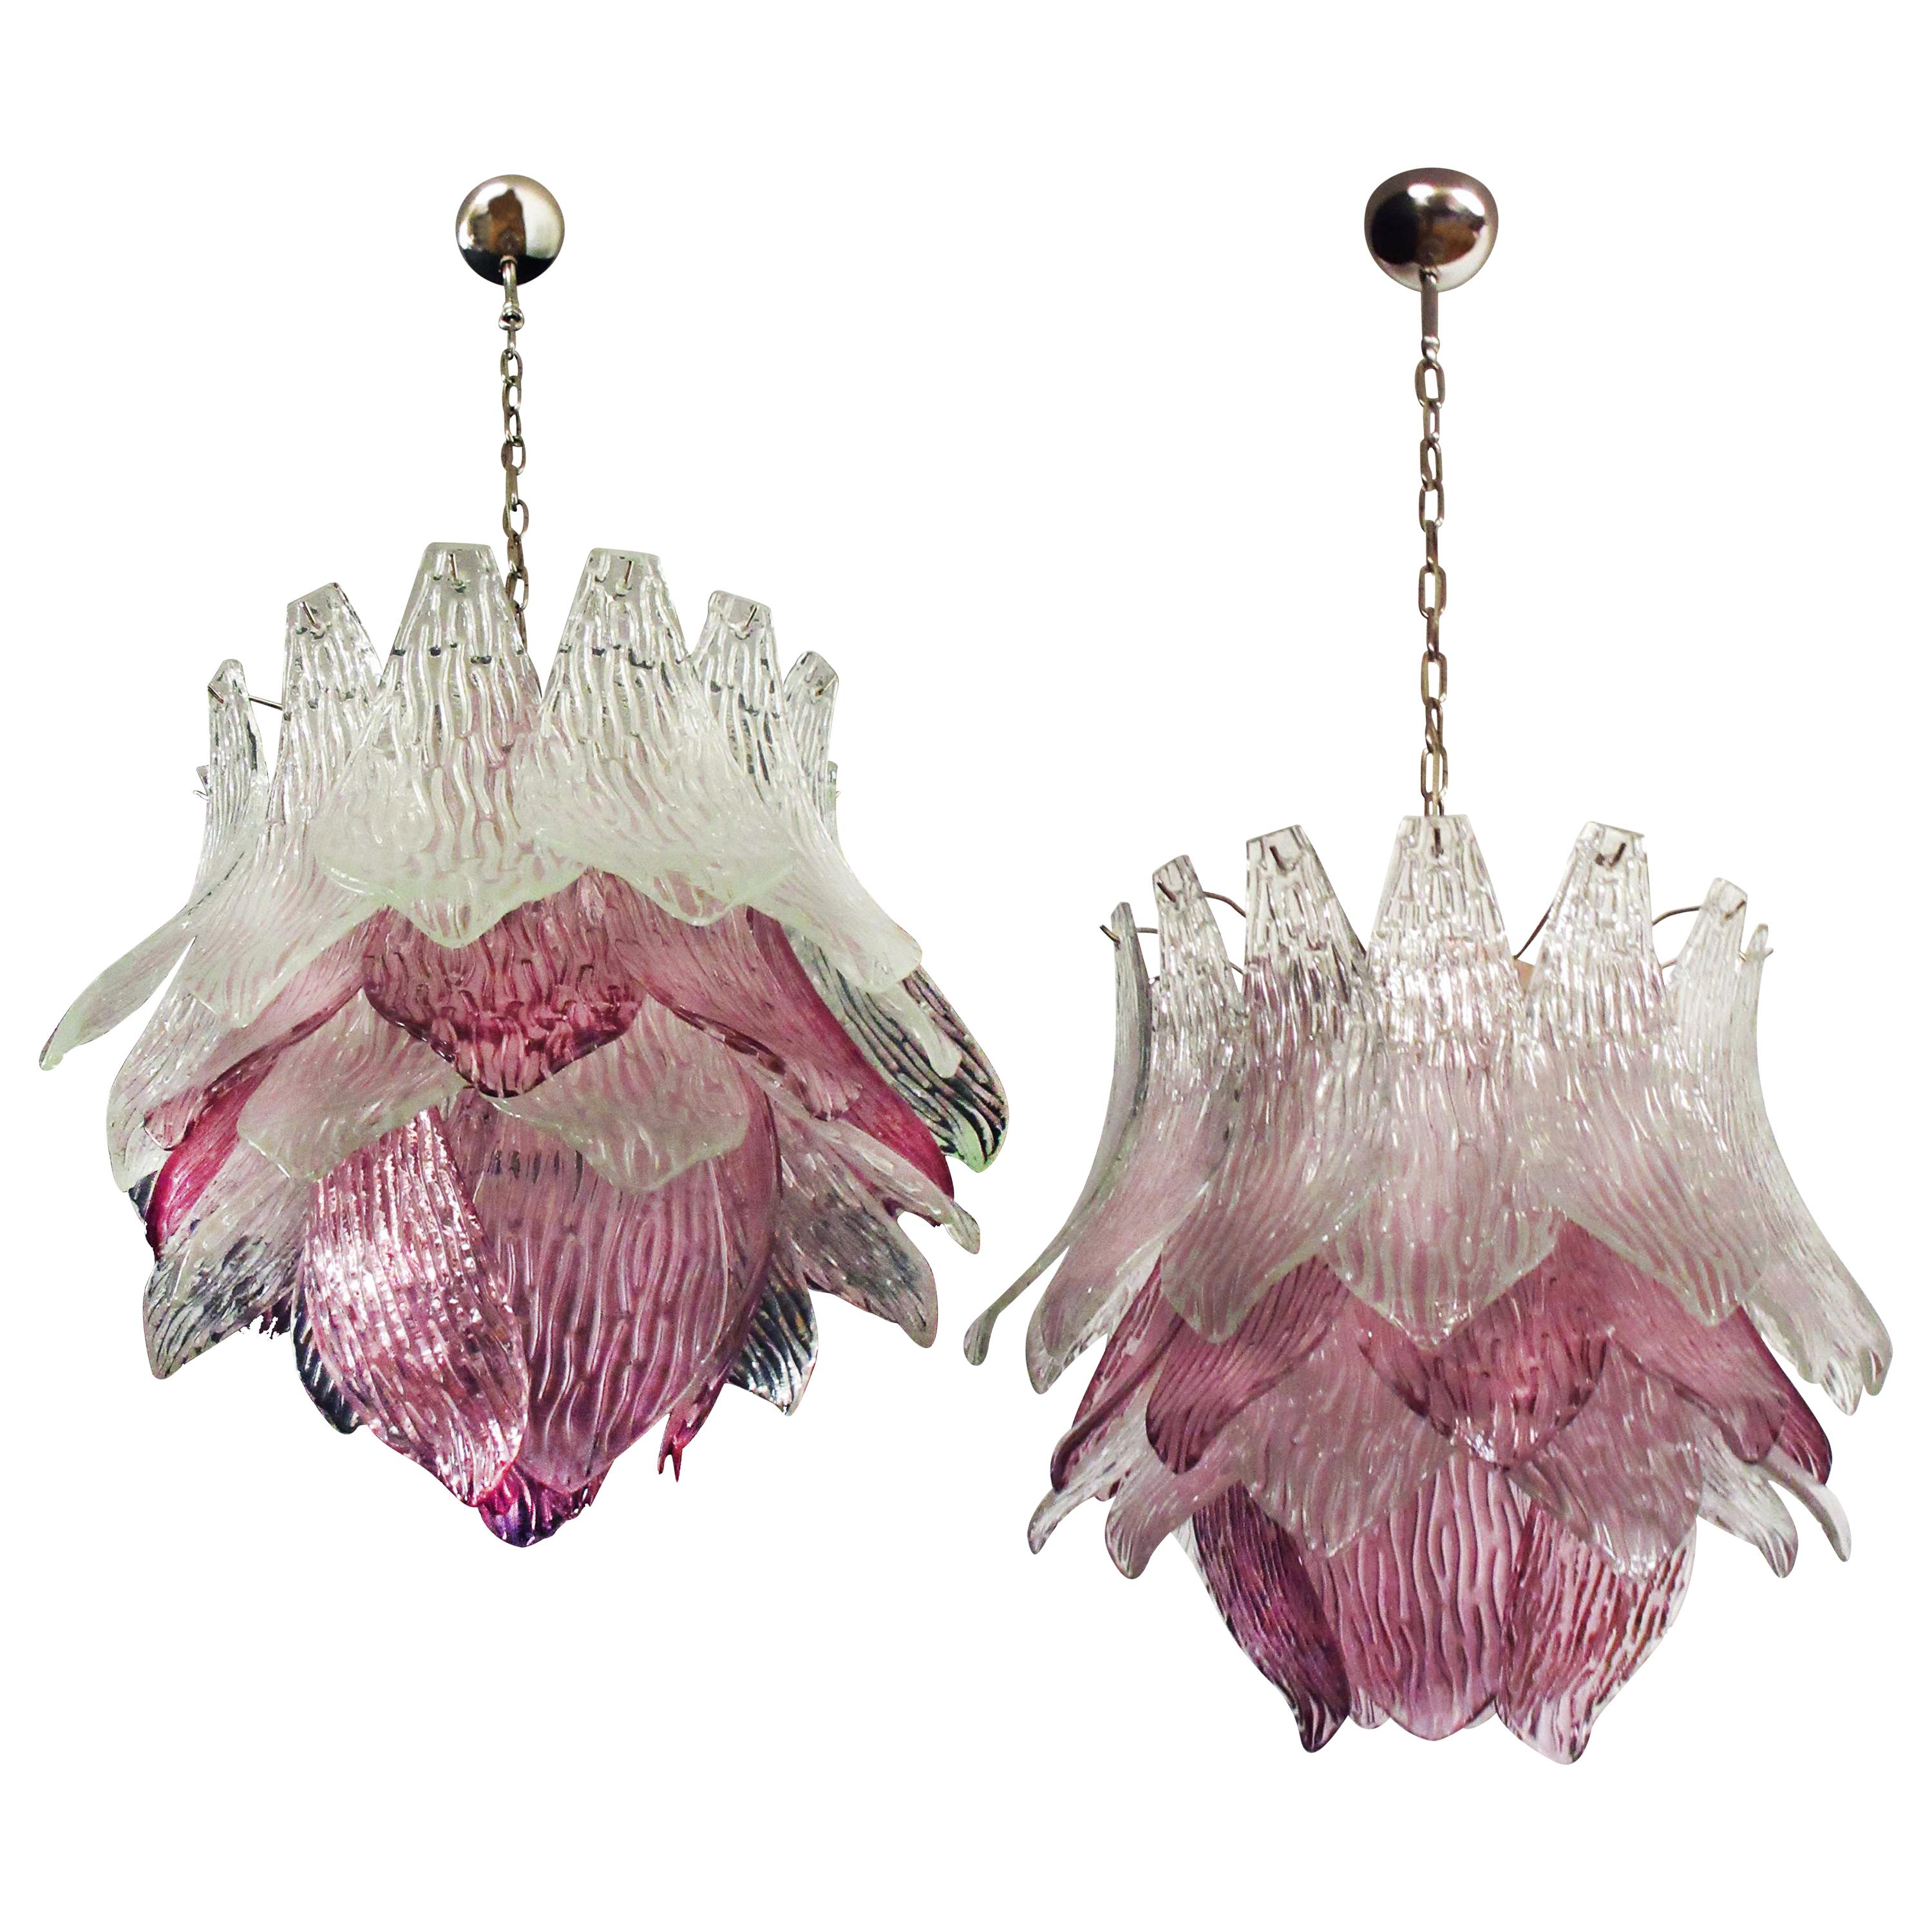 Pair of Italian Murano Chandeliers Transparent and Amethyst Glasses, Murano, 1 For Sale